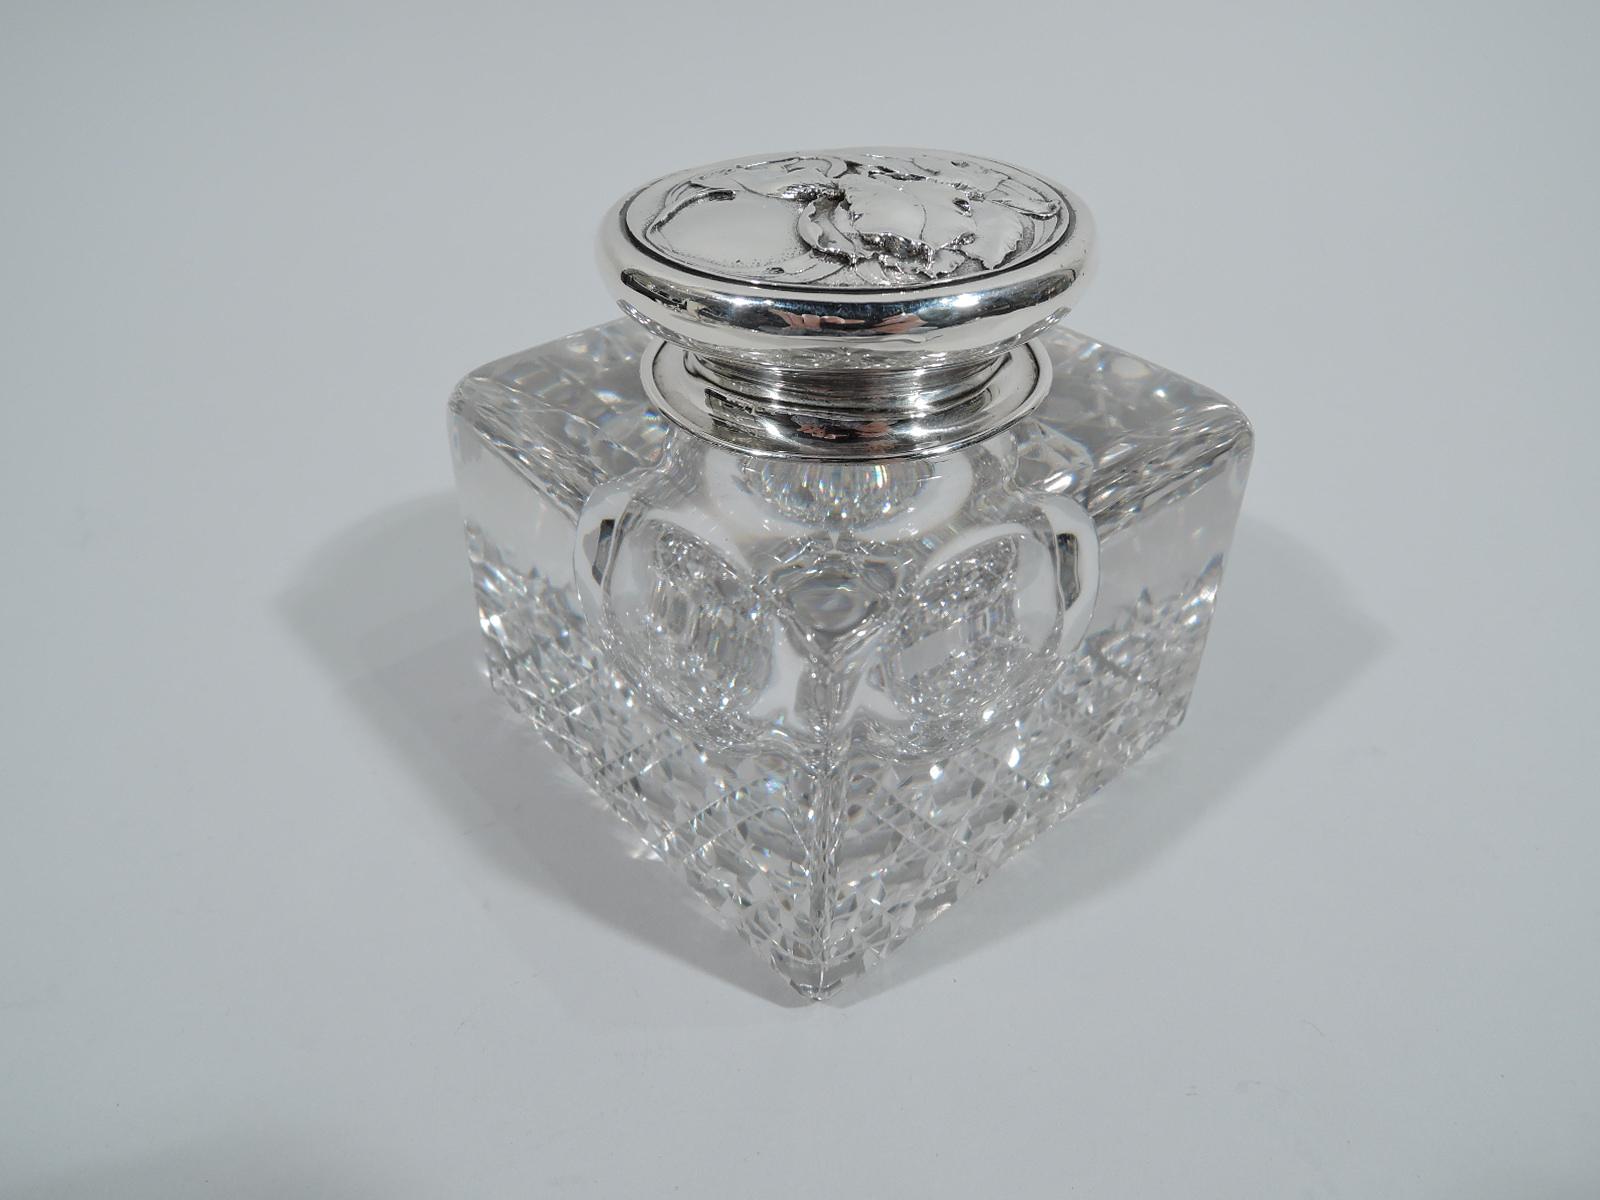 Turn-of-the-century Art Nouveau inkwell. Rectilinear clear-glass block with round well. Diaper cut-to underside. Short neck in sterling silver collar. Cover also sterling silver; top chased with fluid flower heads on stippled ground. Fully marked